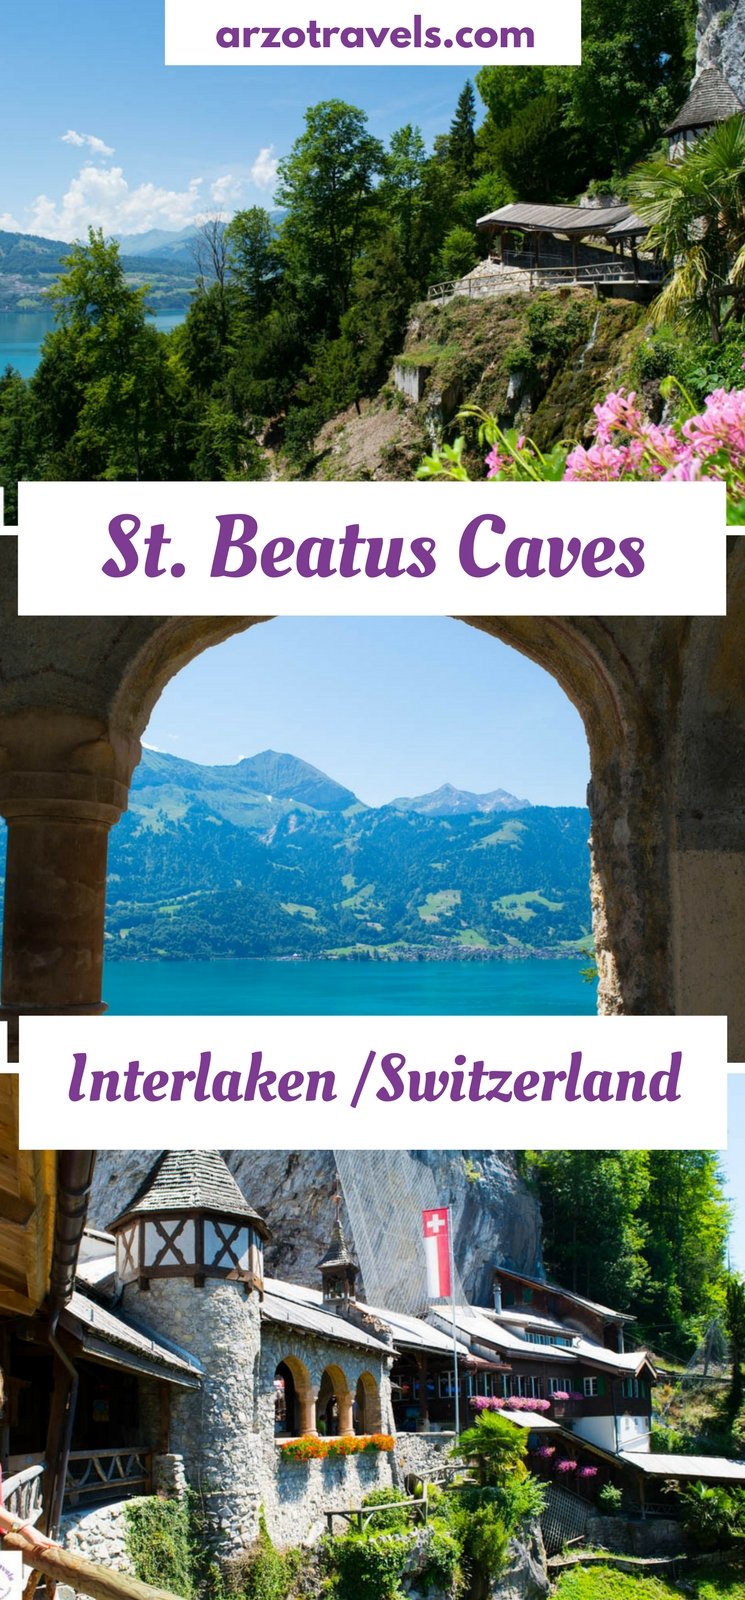 St. Beatus Caves in Interlaken, Switzerland. What to know before visiting this must.see place in the Bernese Overland.